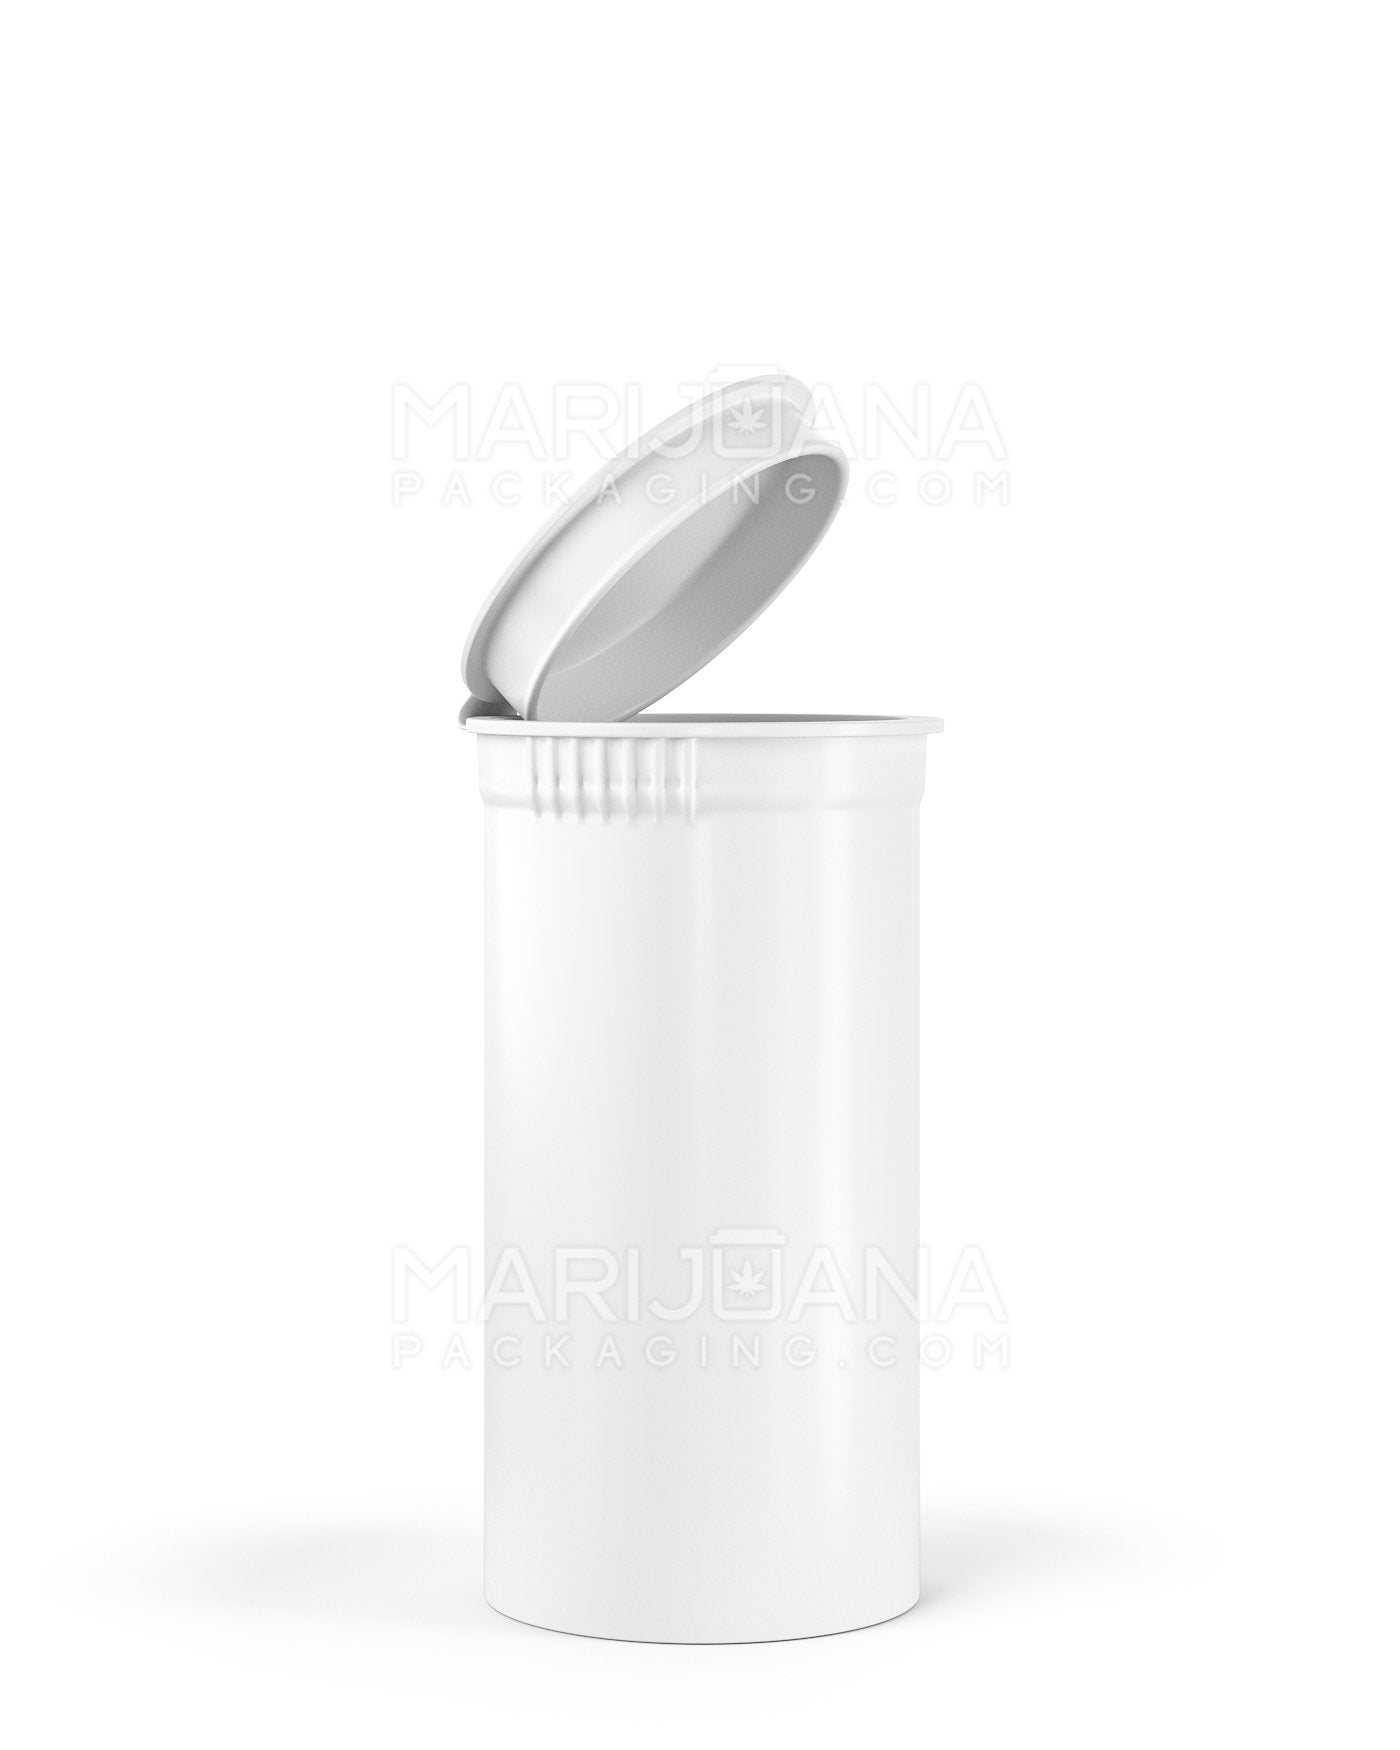 Child Resistant & Sustainable 100% Biodegradable Opaque White Pop Top Bottles | 13dr - 2g | Sample - 1